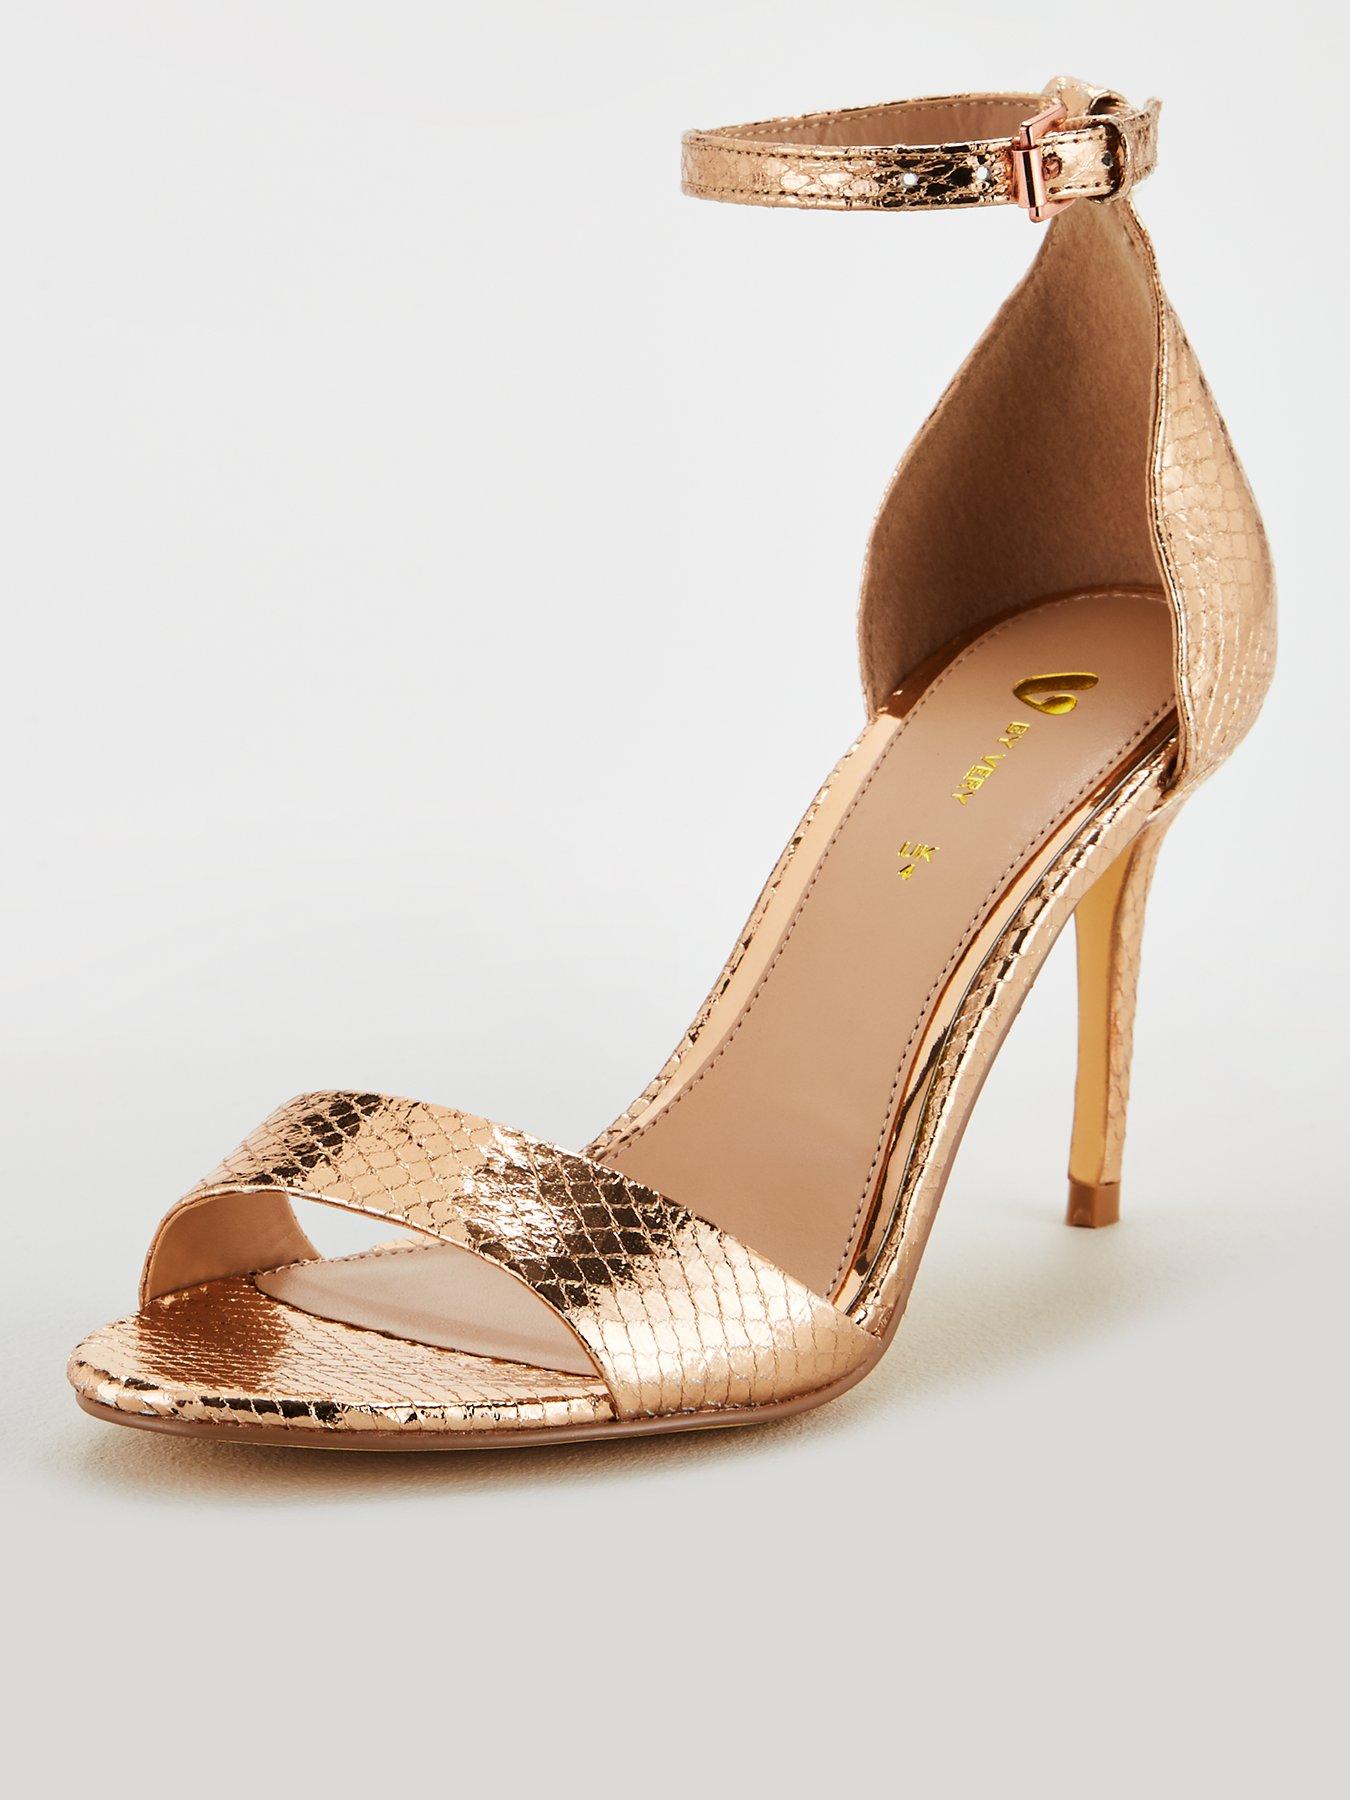 rose gold shoes mid heel